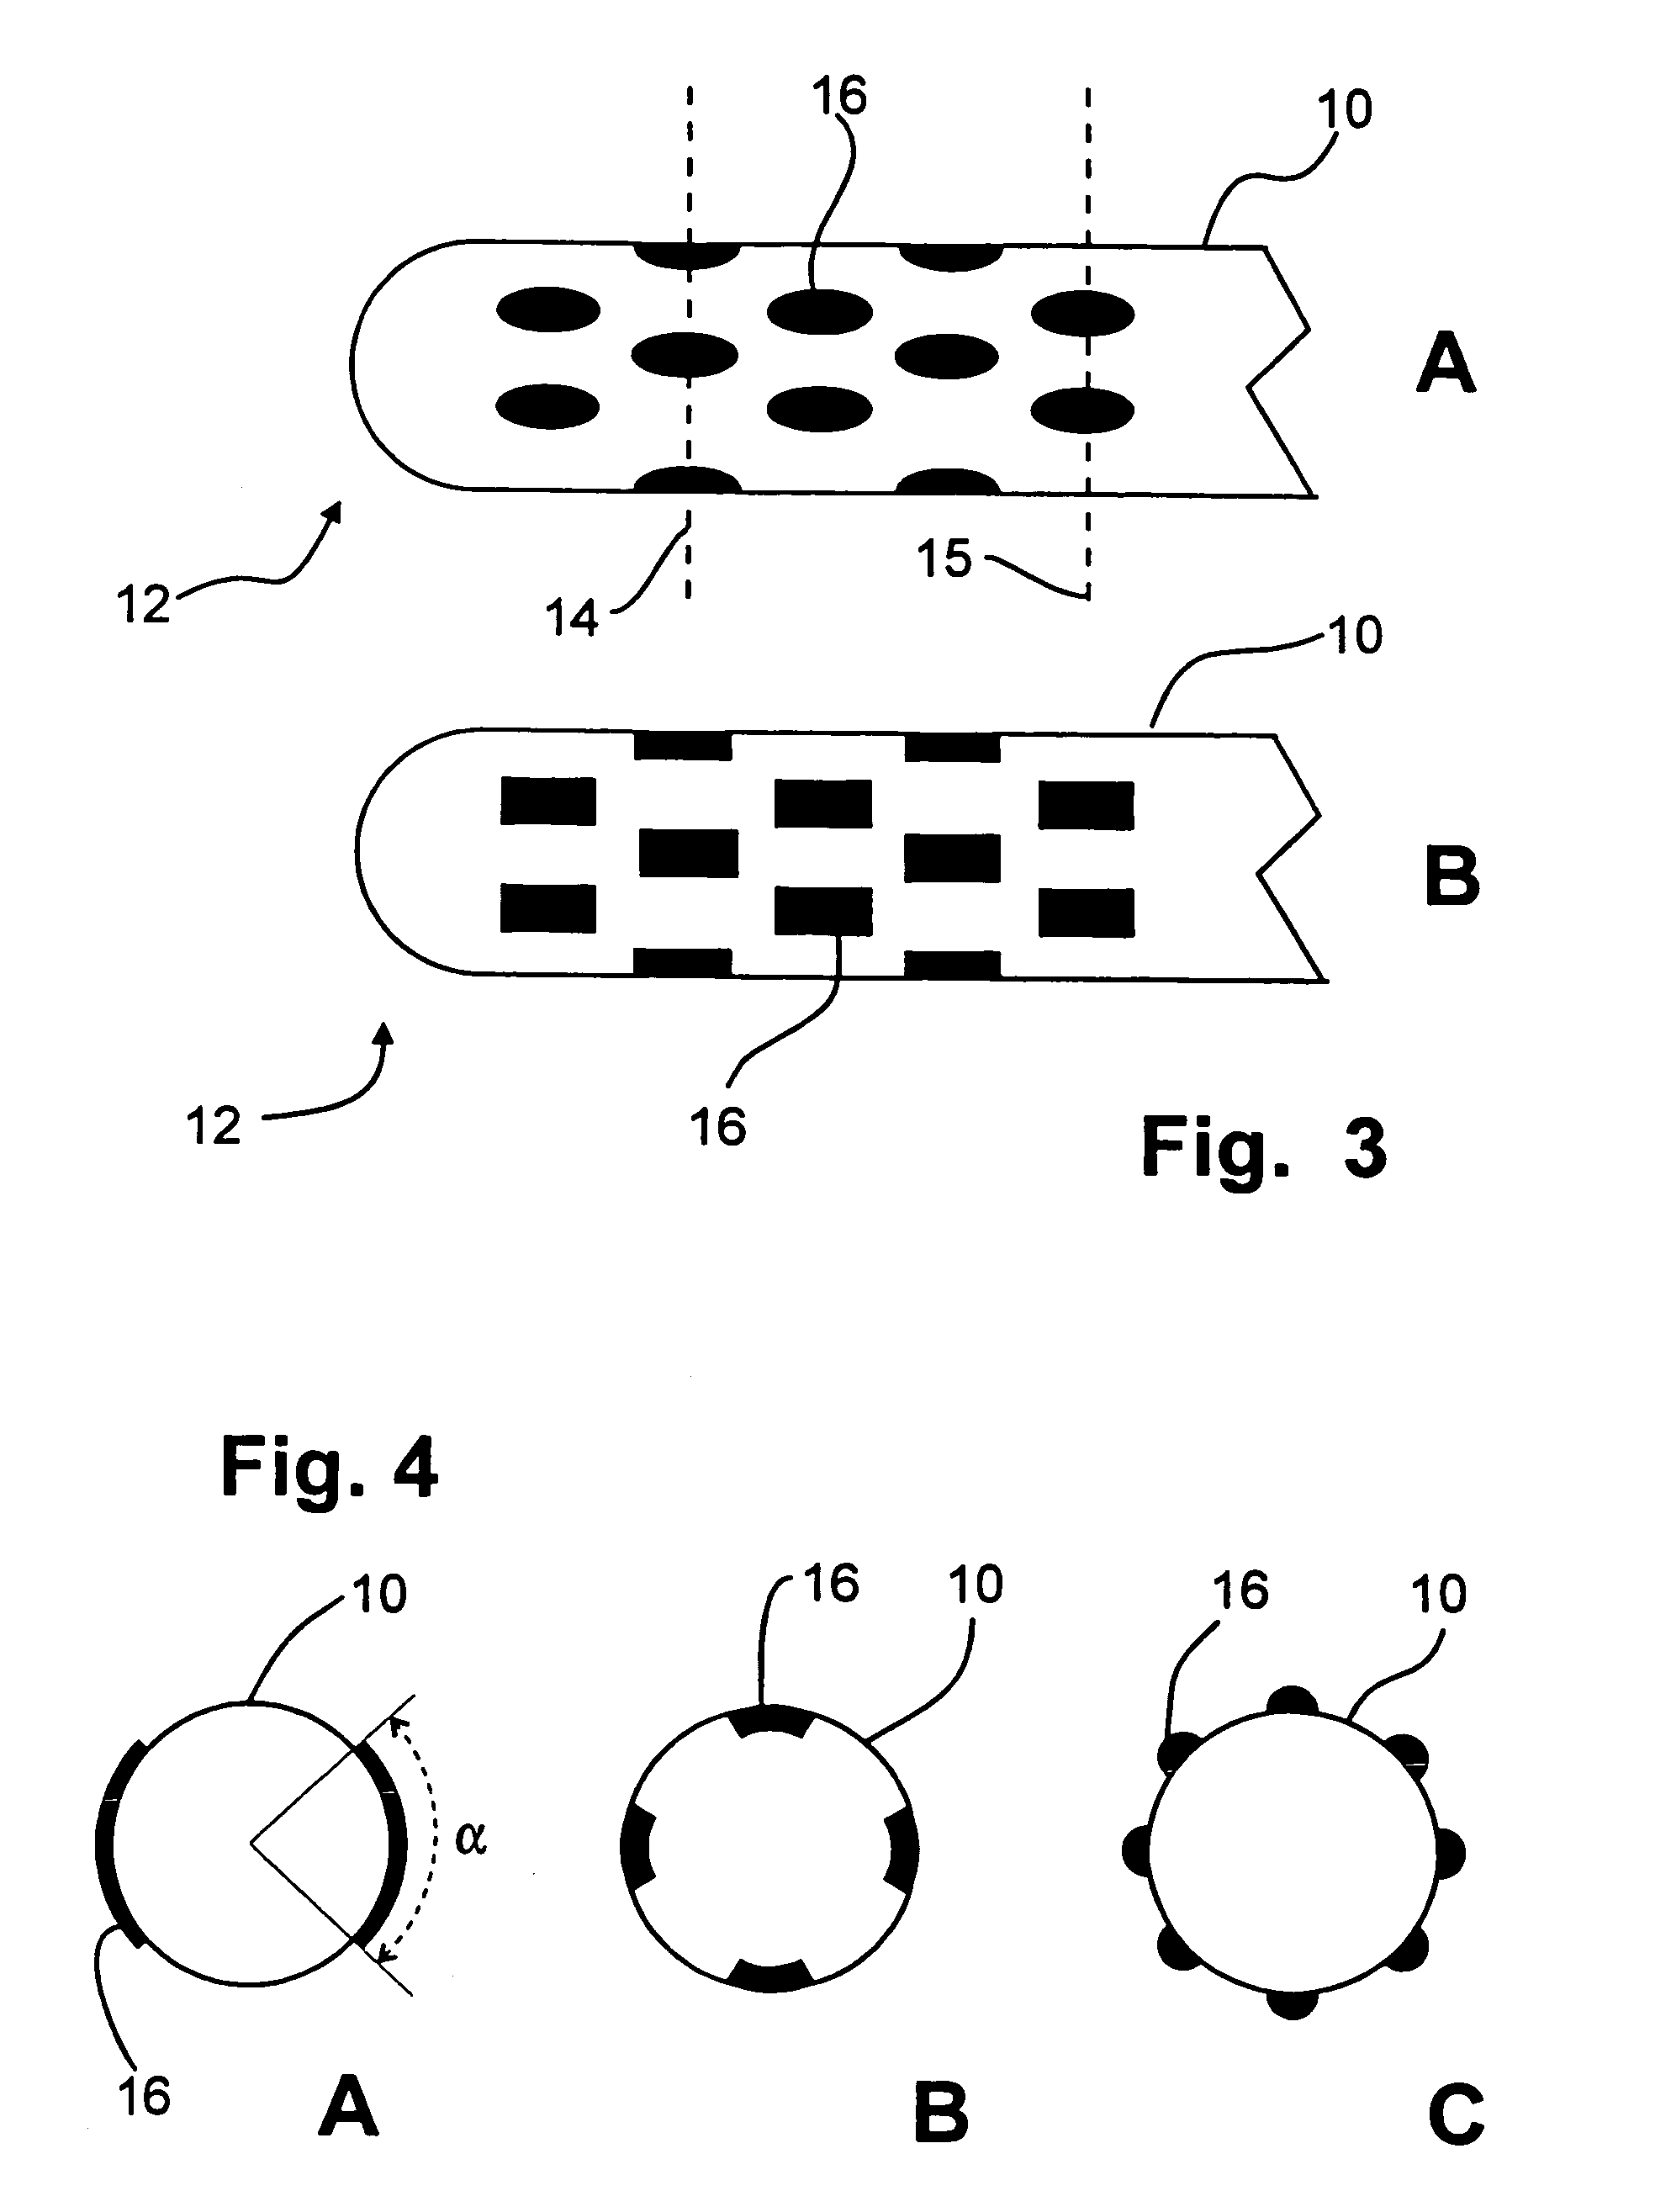 Medical implant device for electrostimulation using discrete micro-electrodes